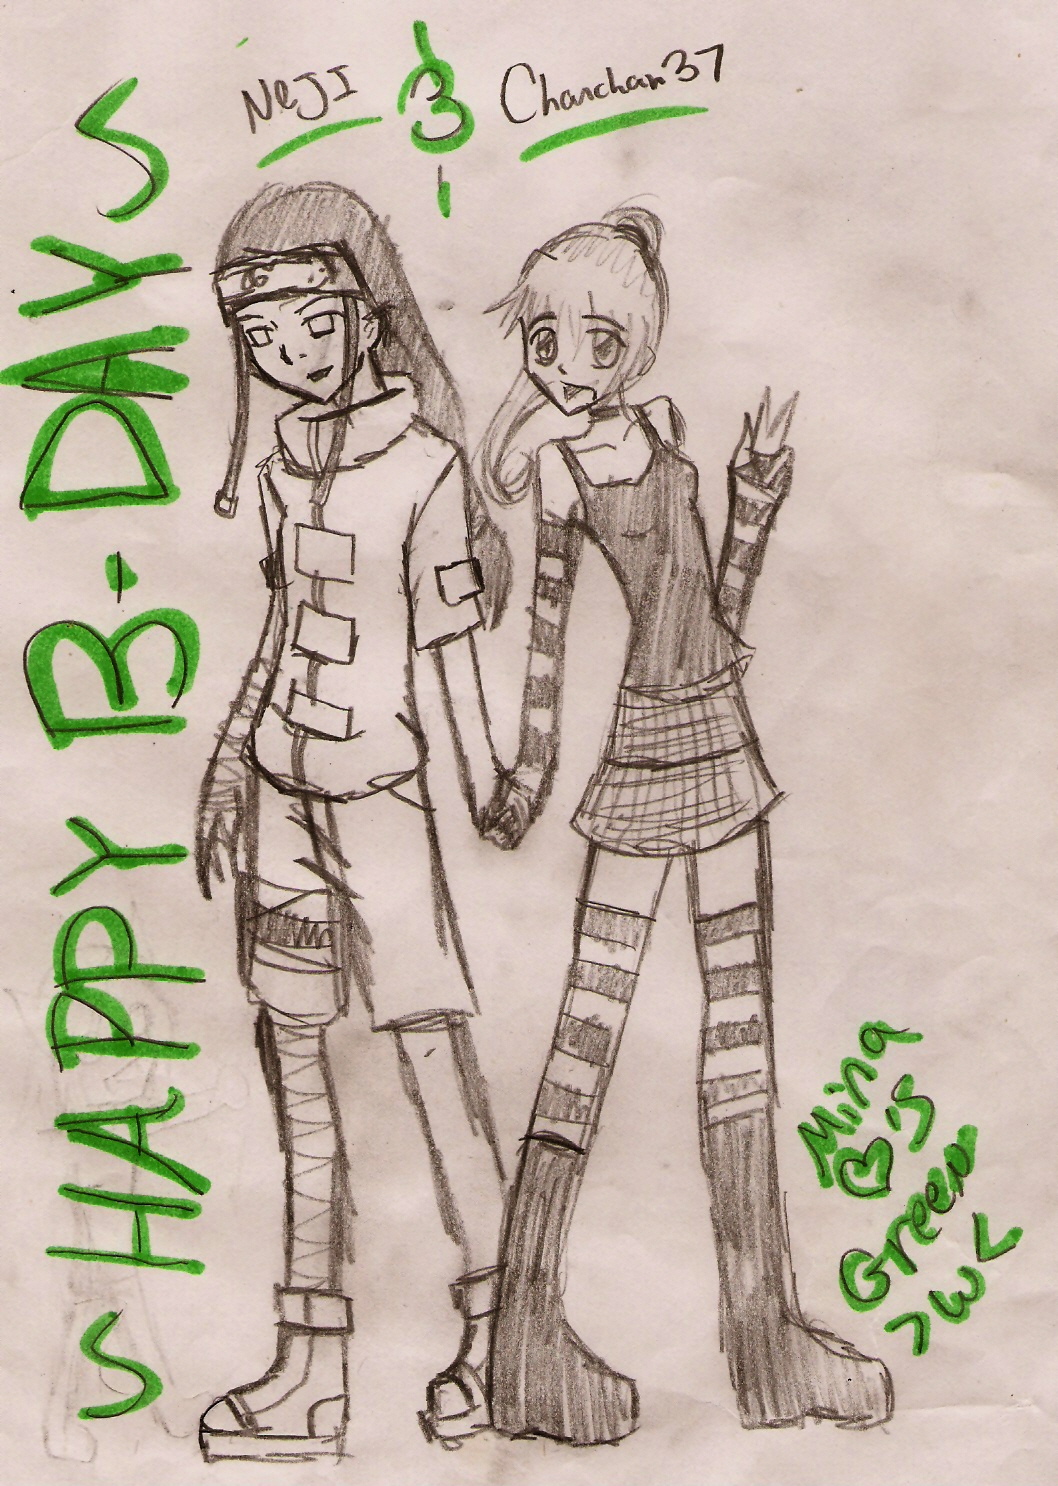 Neji and chanchan37 ~HAPPY BELATED B-DAY~ by MINA-CHAN